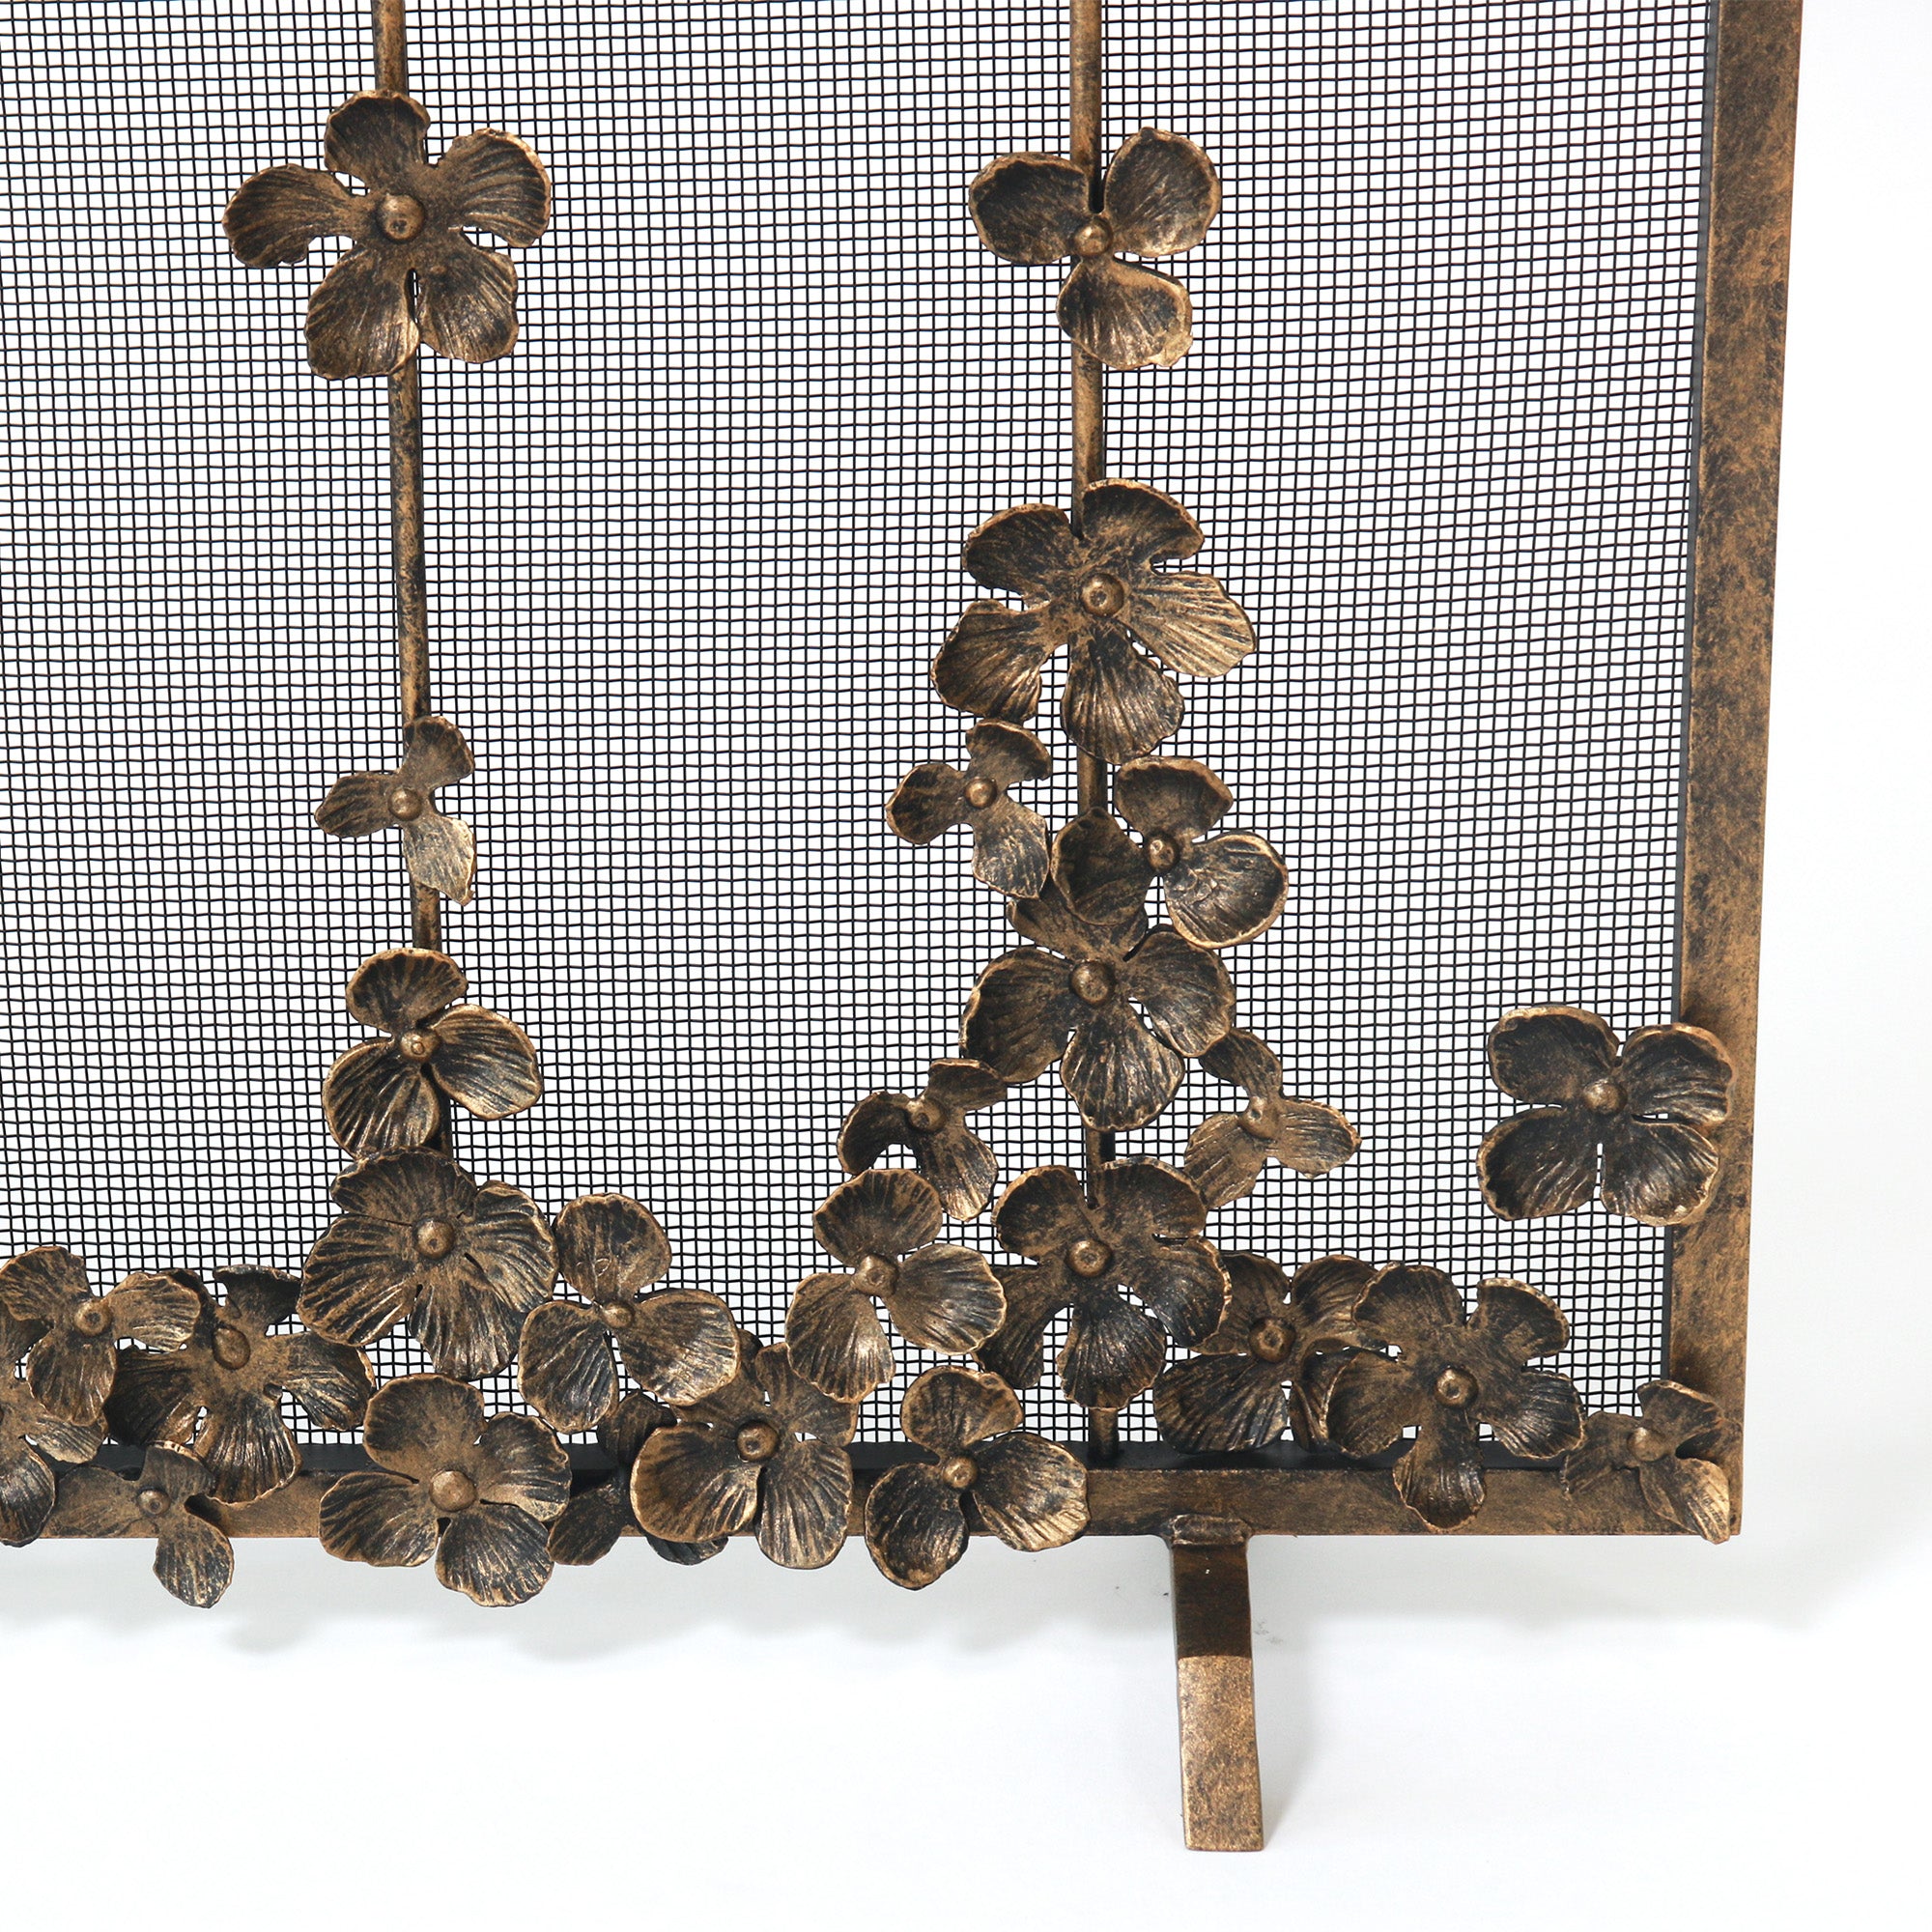 Cascading Blooms Fireplace Screen in Aged Gold